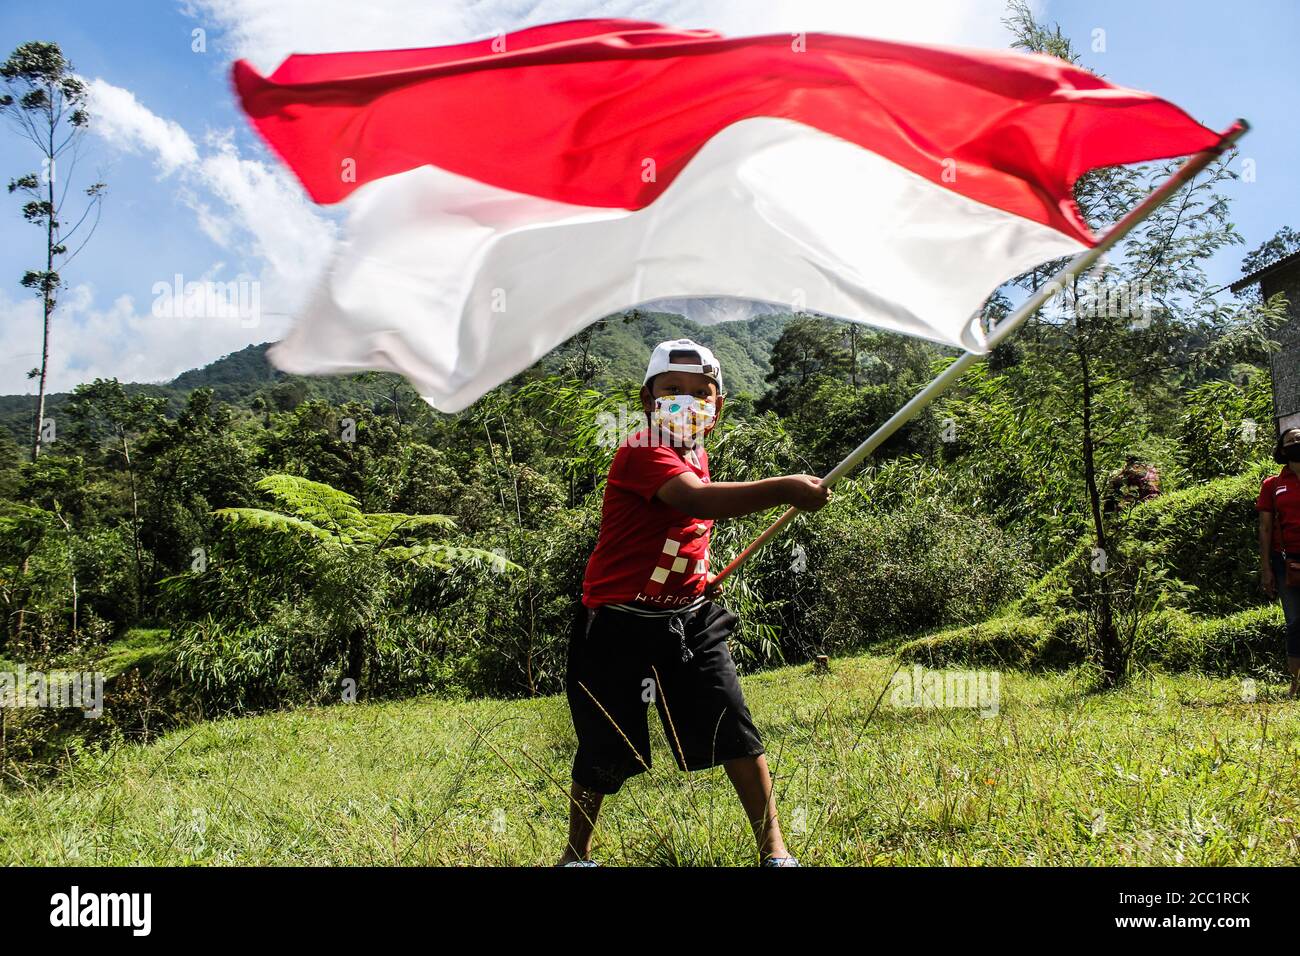 Sleman, YOGYAKARTA, INDONESIA. 17th Aug, 2020. An Indonesian child plays the Indonesian flag, Red and White, marking the 75th anniversary of the independence of the Republic of Indonesia in Cangkringan, Sleman, Yogyakarta, Indonesia. Indonesia became independent in 1945 from Dutch colonialism. Credit: Slamet Riyadi/ZUMA Wire/Alamy Live News Stock Photo